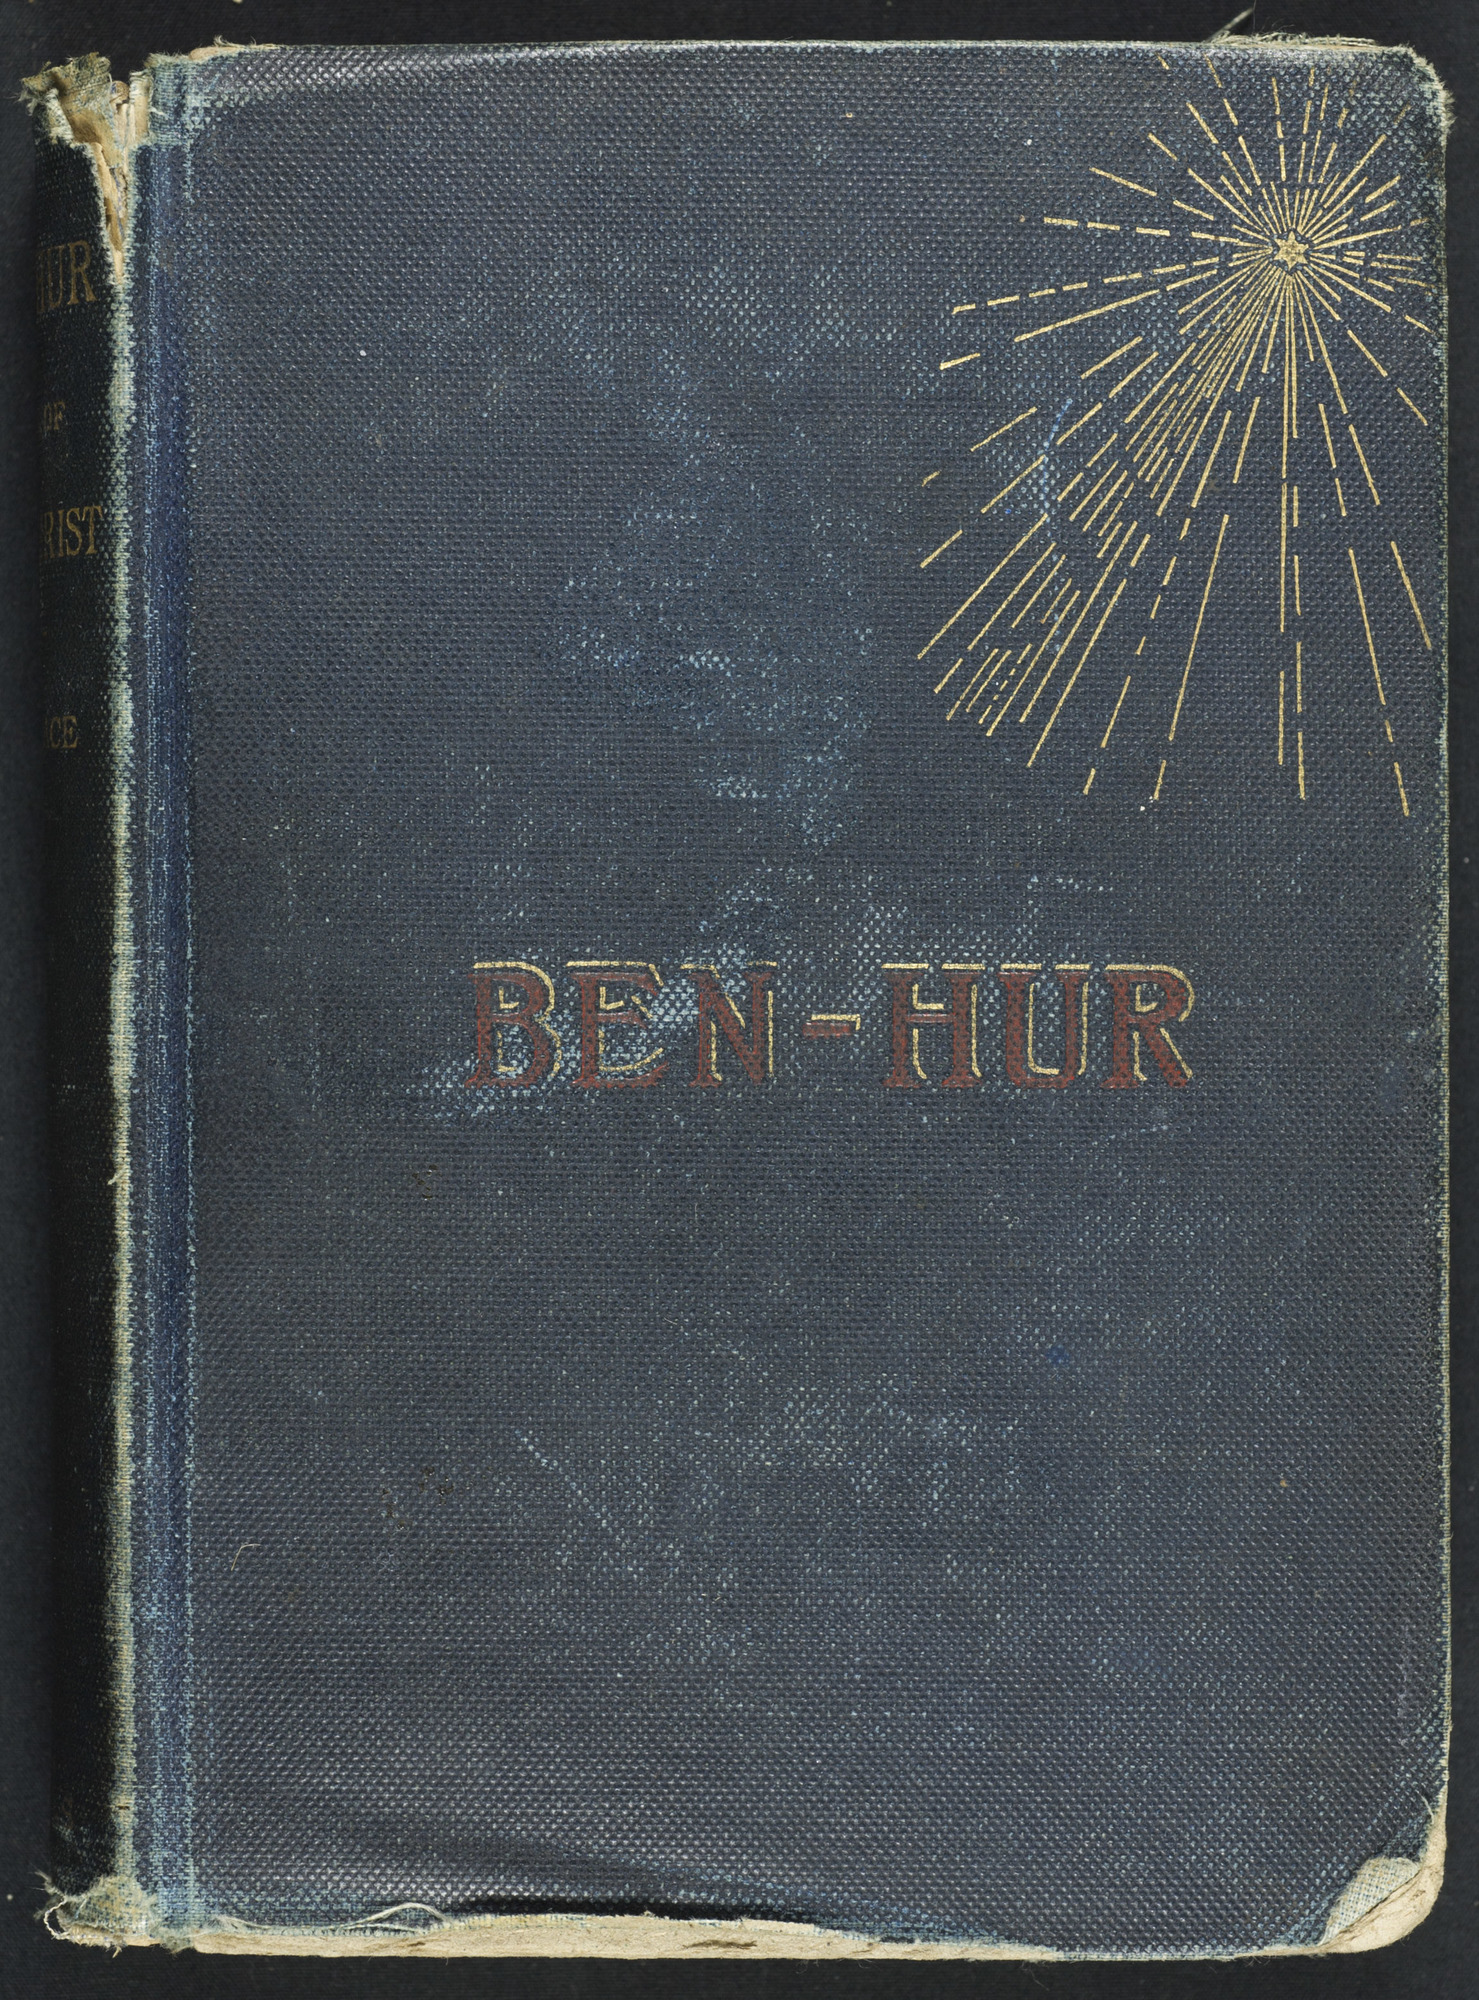 Ben-Hur, or A Tale of the Christ